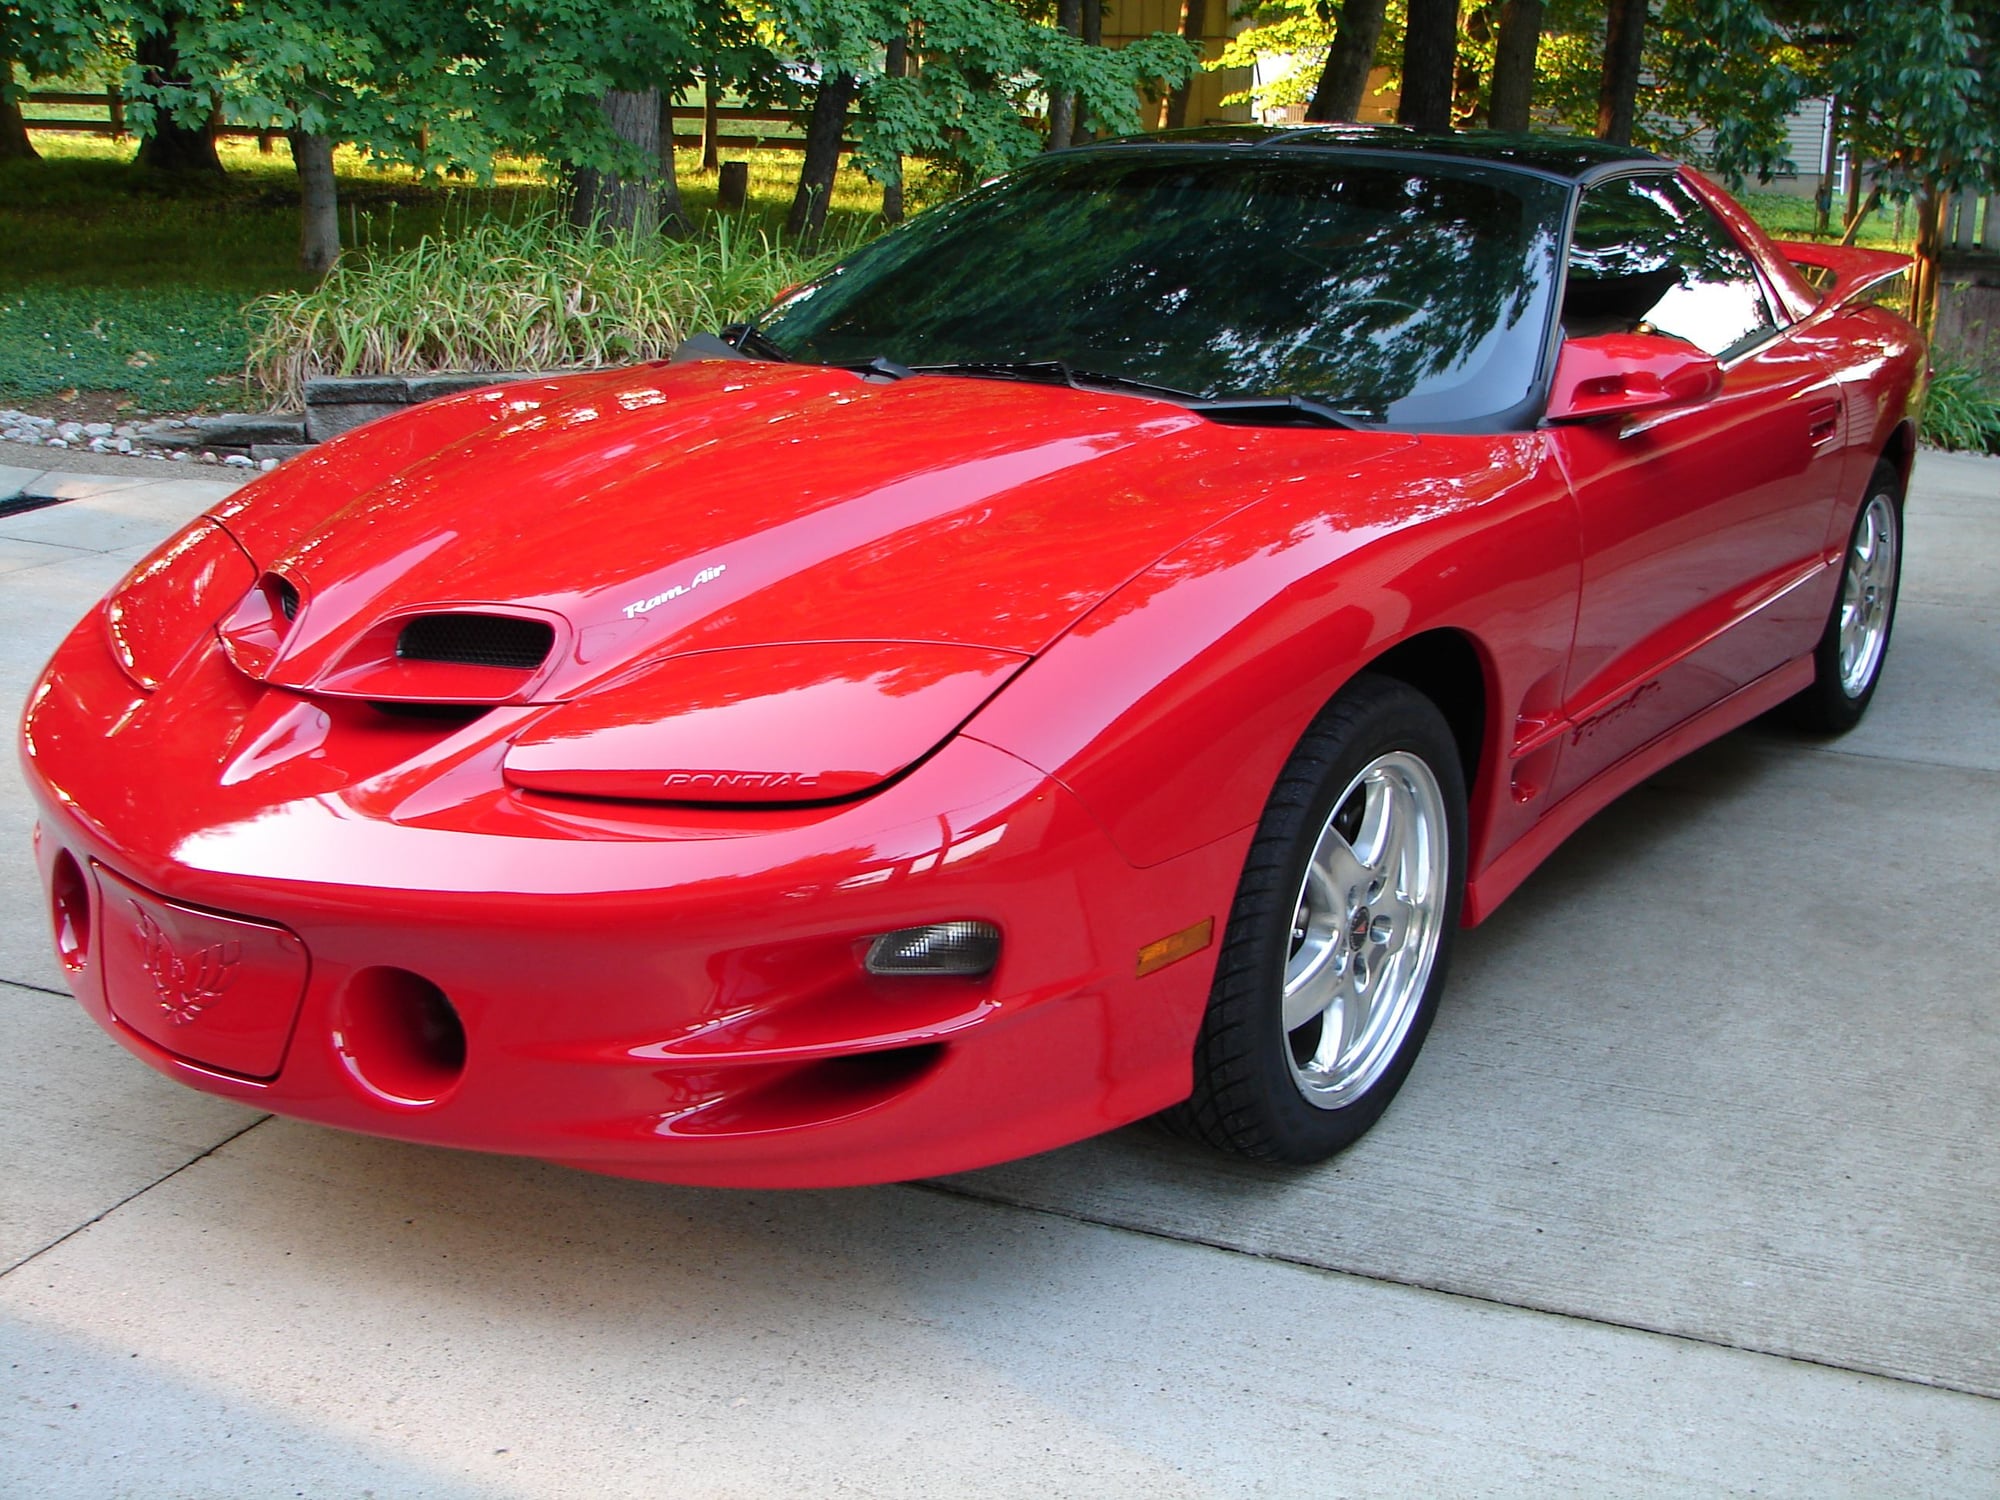 2002 Pontiac Firebird - *** SALE PENDING *** 2002 Pontiac Firebird Trans Am WS6 w/only 1500 miles - Used - VIN 2G2FV22G622167440 - 1,509 Miles - 8 cyl - 2WD - Automatic - Coupe - Red - Glasgow, KY 42141, United States